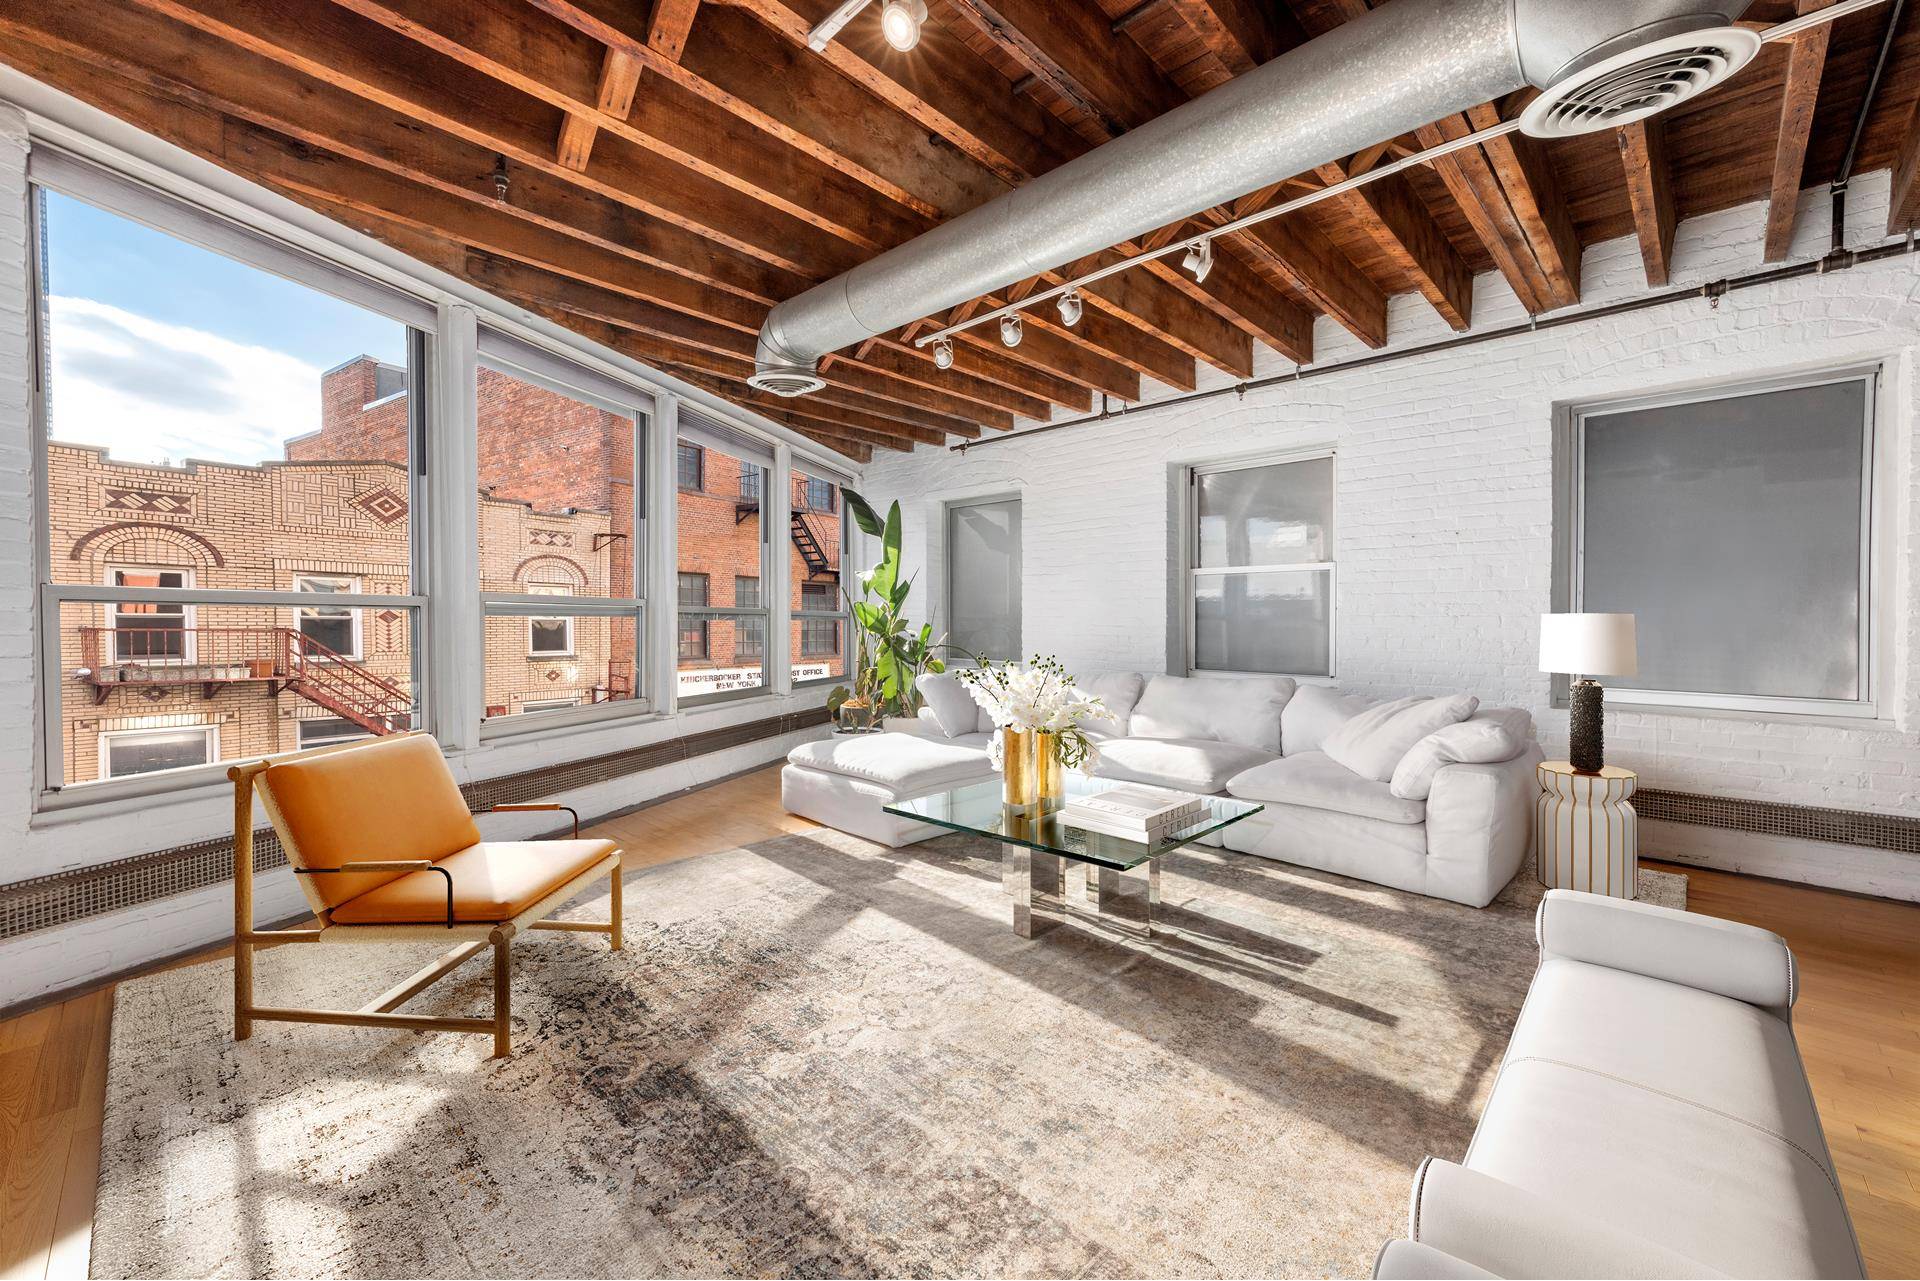 Introducing this true artist loft located in one of the most stylish neighborhoods of Manhattan.